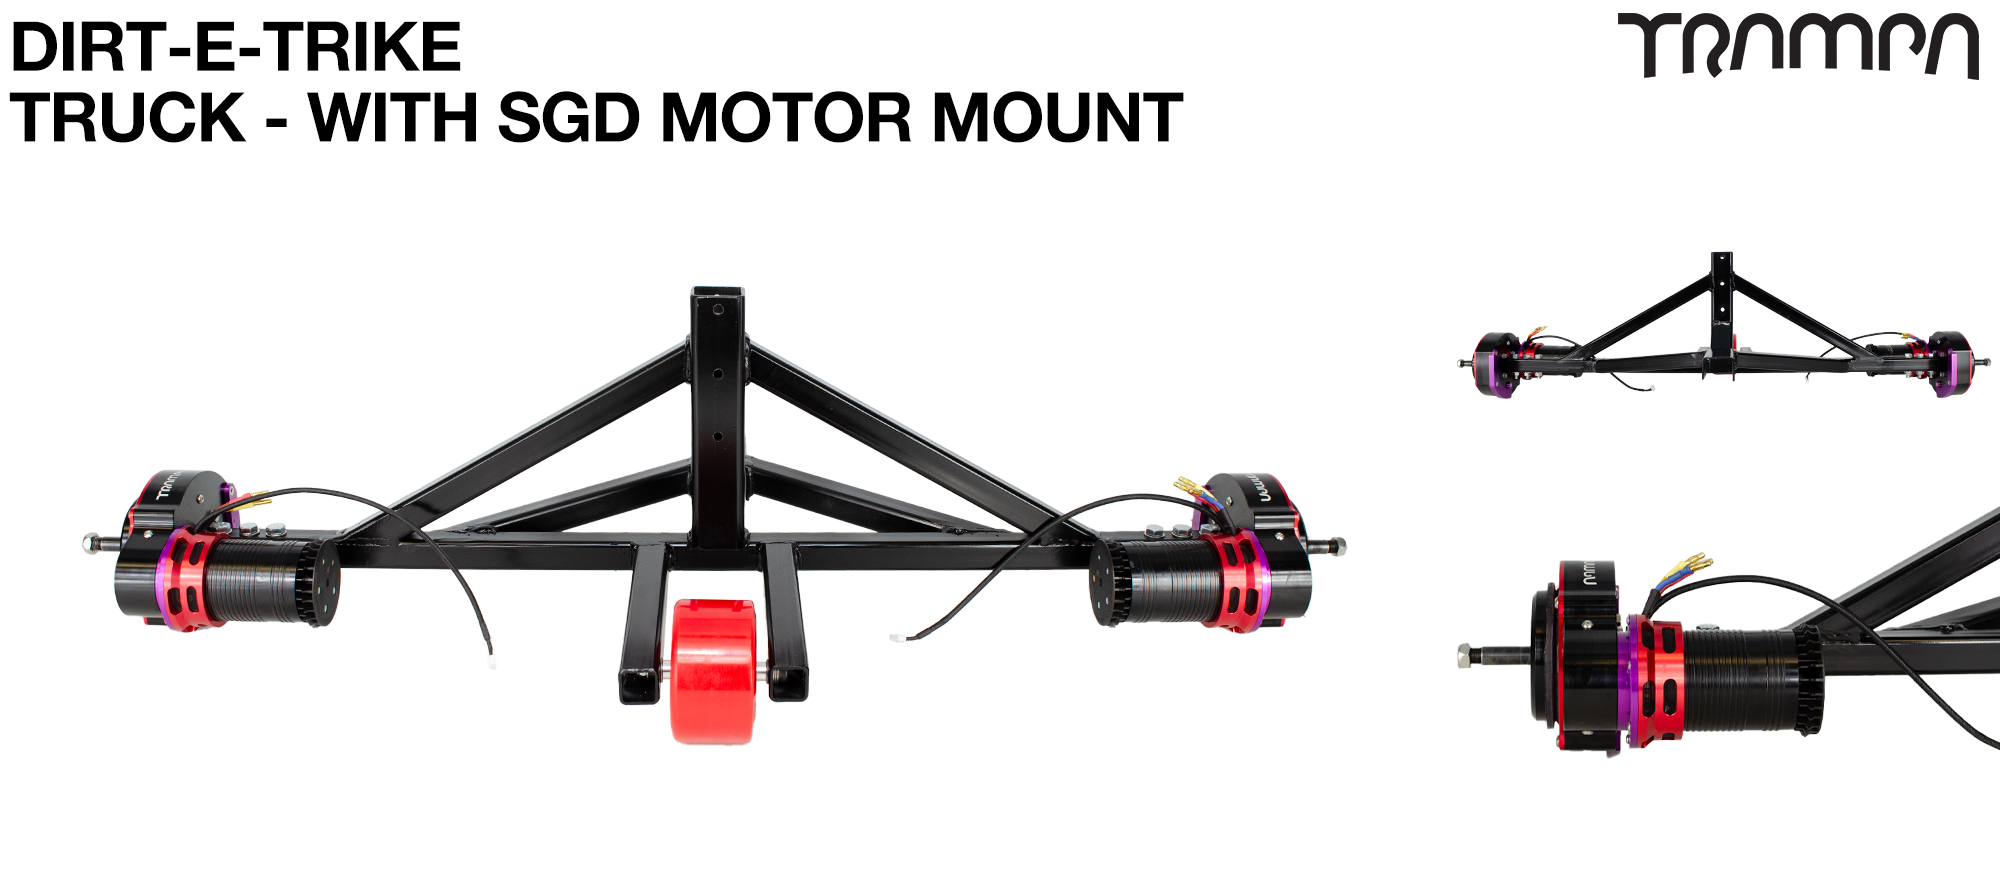 DIRT-E-TRIKE TRUCK with SGD MOTOR Mount